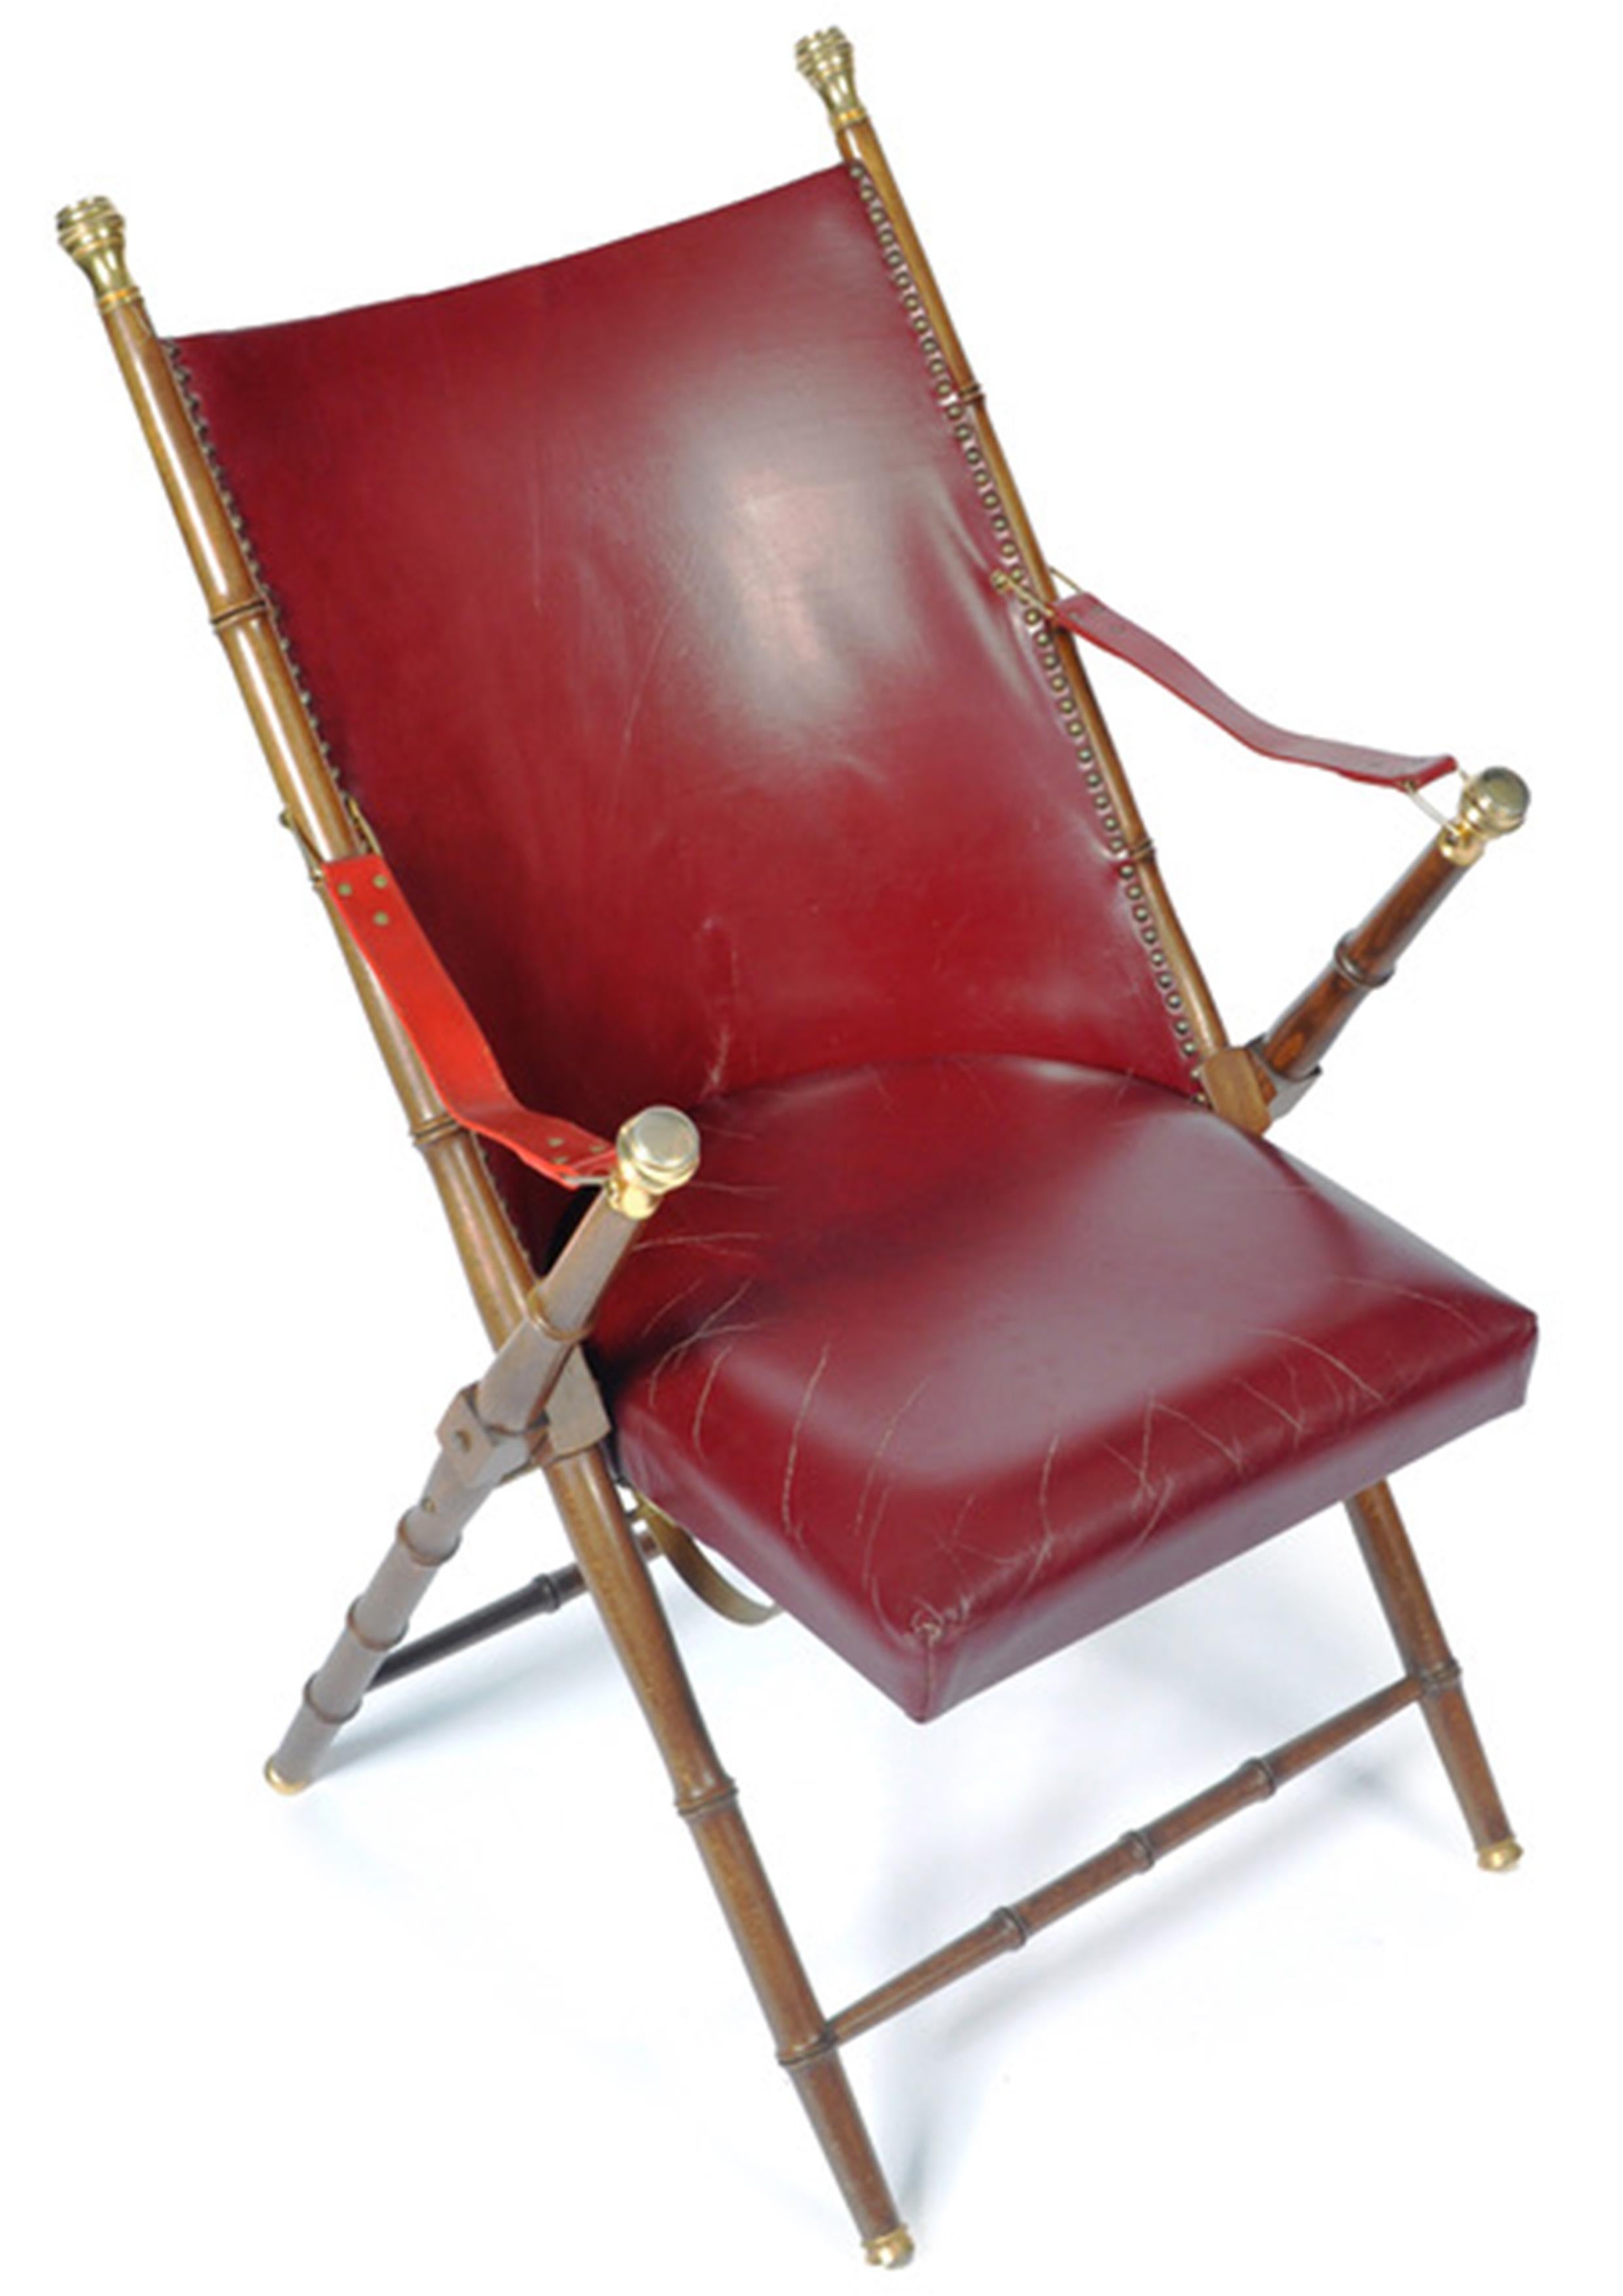 Maison Jansen Faux Bamboo Folding Campaign Chair Finished With Brass Studs & Red Leather Cushioned Seat And Brass Mounts 1950's
